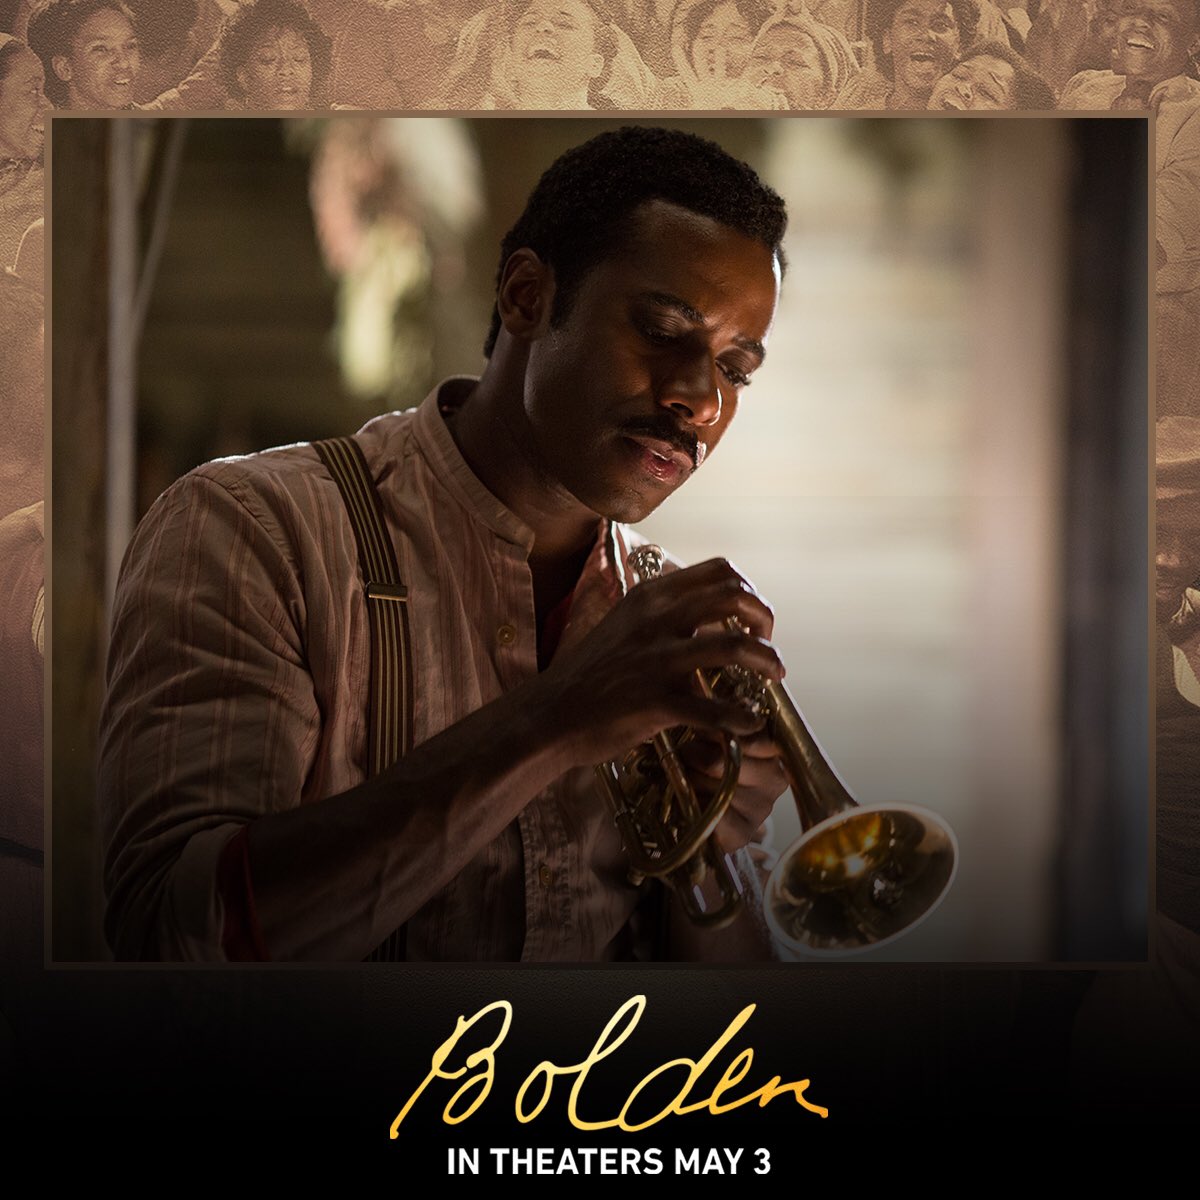 We salute #TheDeuce 's own #Gary Carr starring as #BuddyBolden in @boldenmovie in theaters May 3! #boldenmovie #CC youtu.be/jolrE8K4XpU